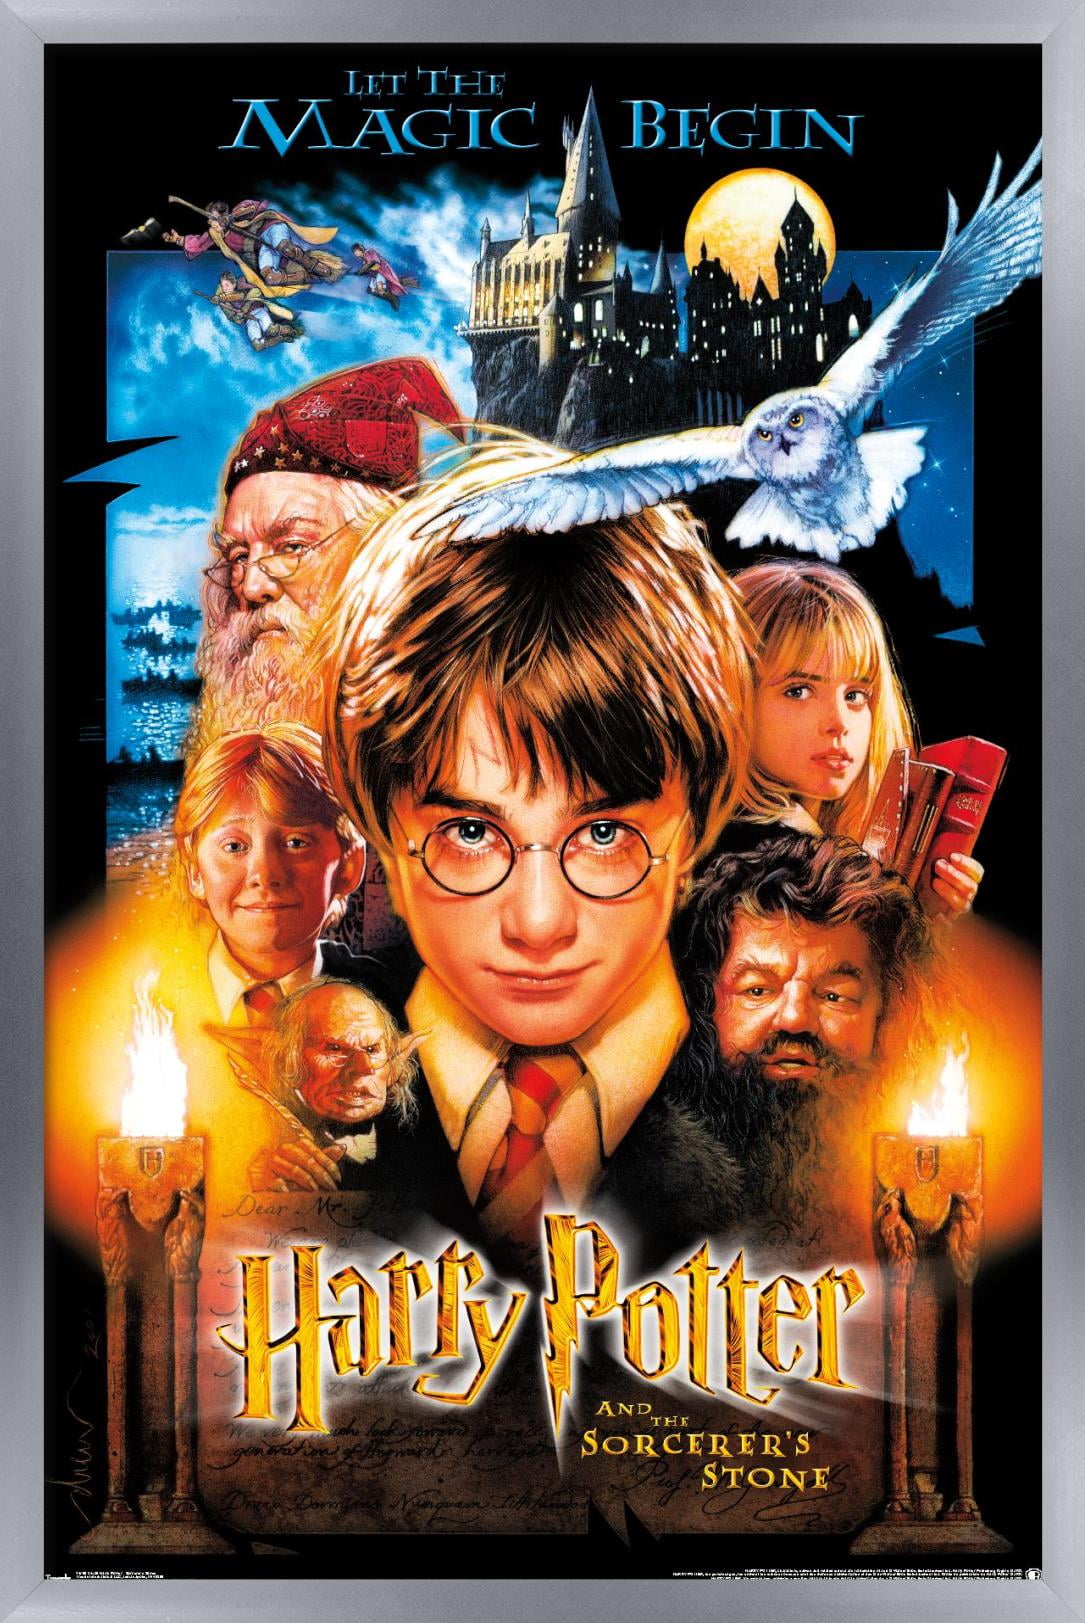 SD Toys Harry Potter Sorcerers Stone Movie Poster Puzzle 1000